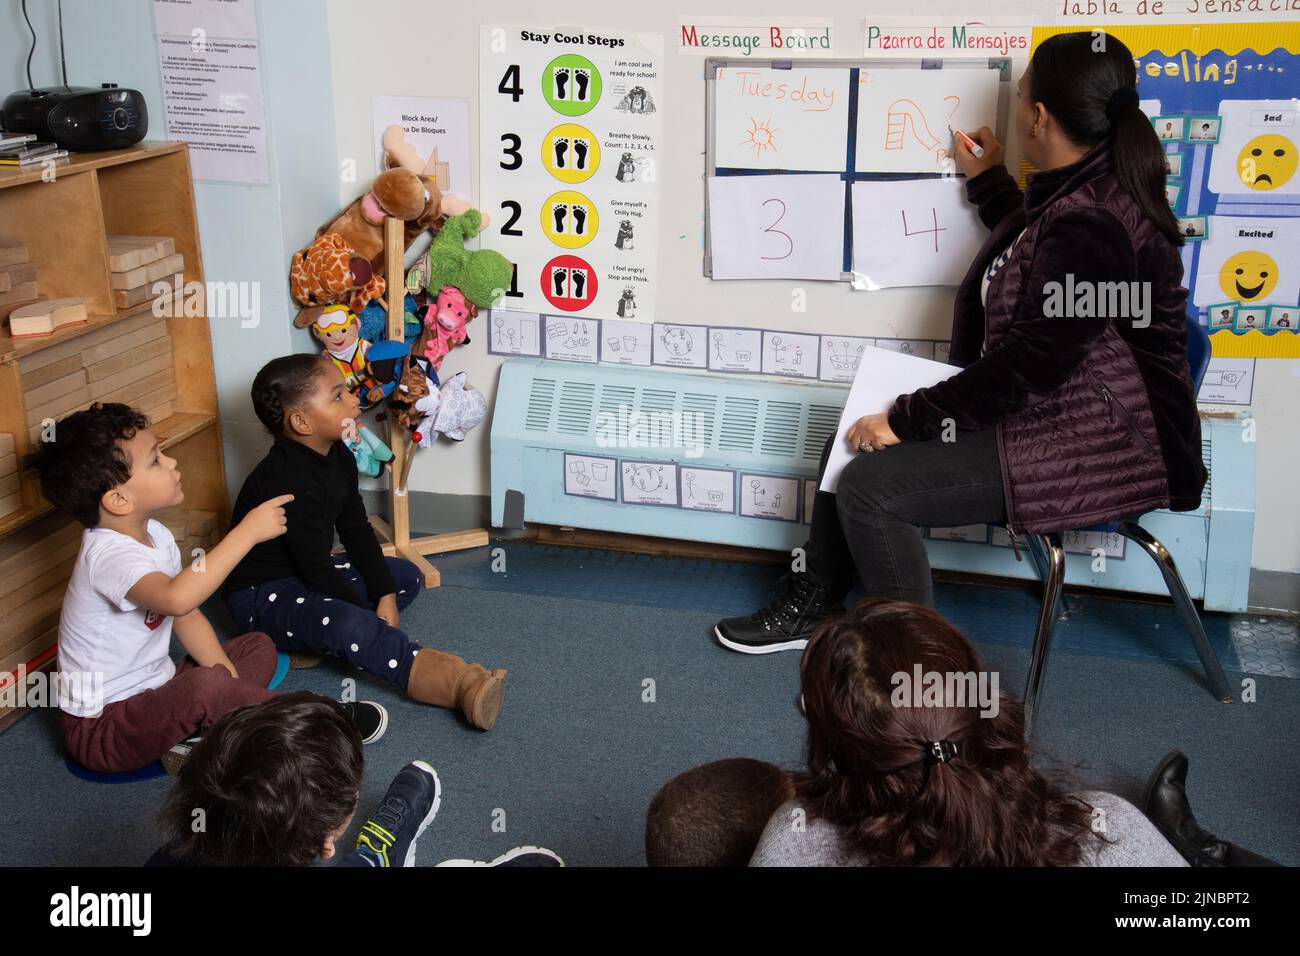 Education Preschool Child Care 3 year olds group with female teachers at meeting time, message board signs in English and Spanish Stock Photo